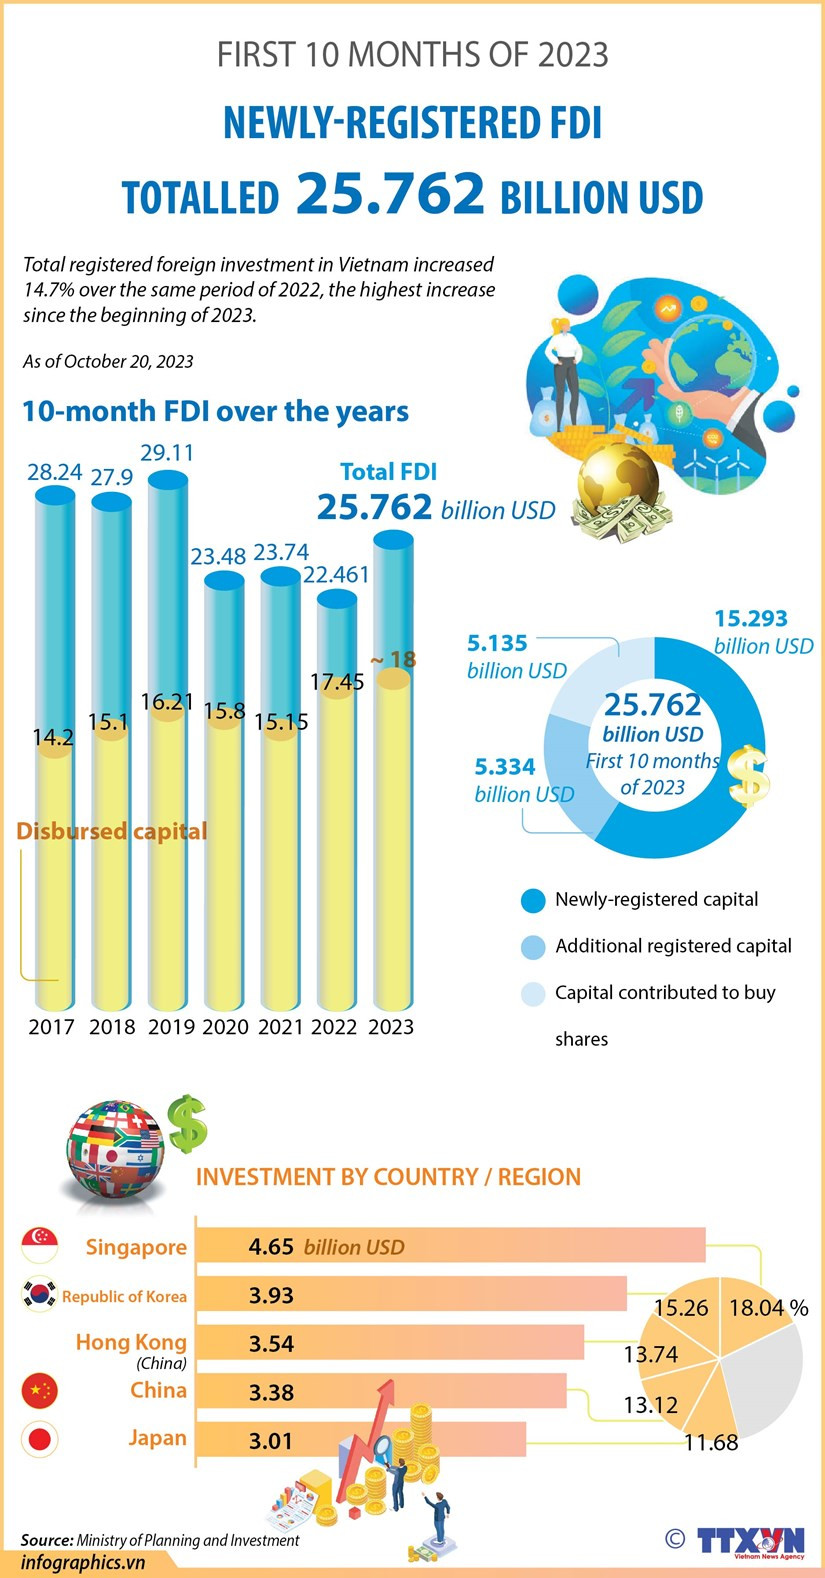 Newly-registered FDI at 25.7 billion USD in 10M hinh anh 1